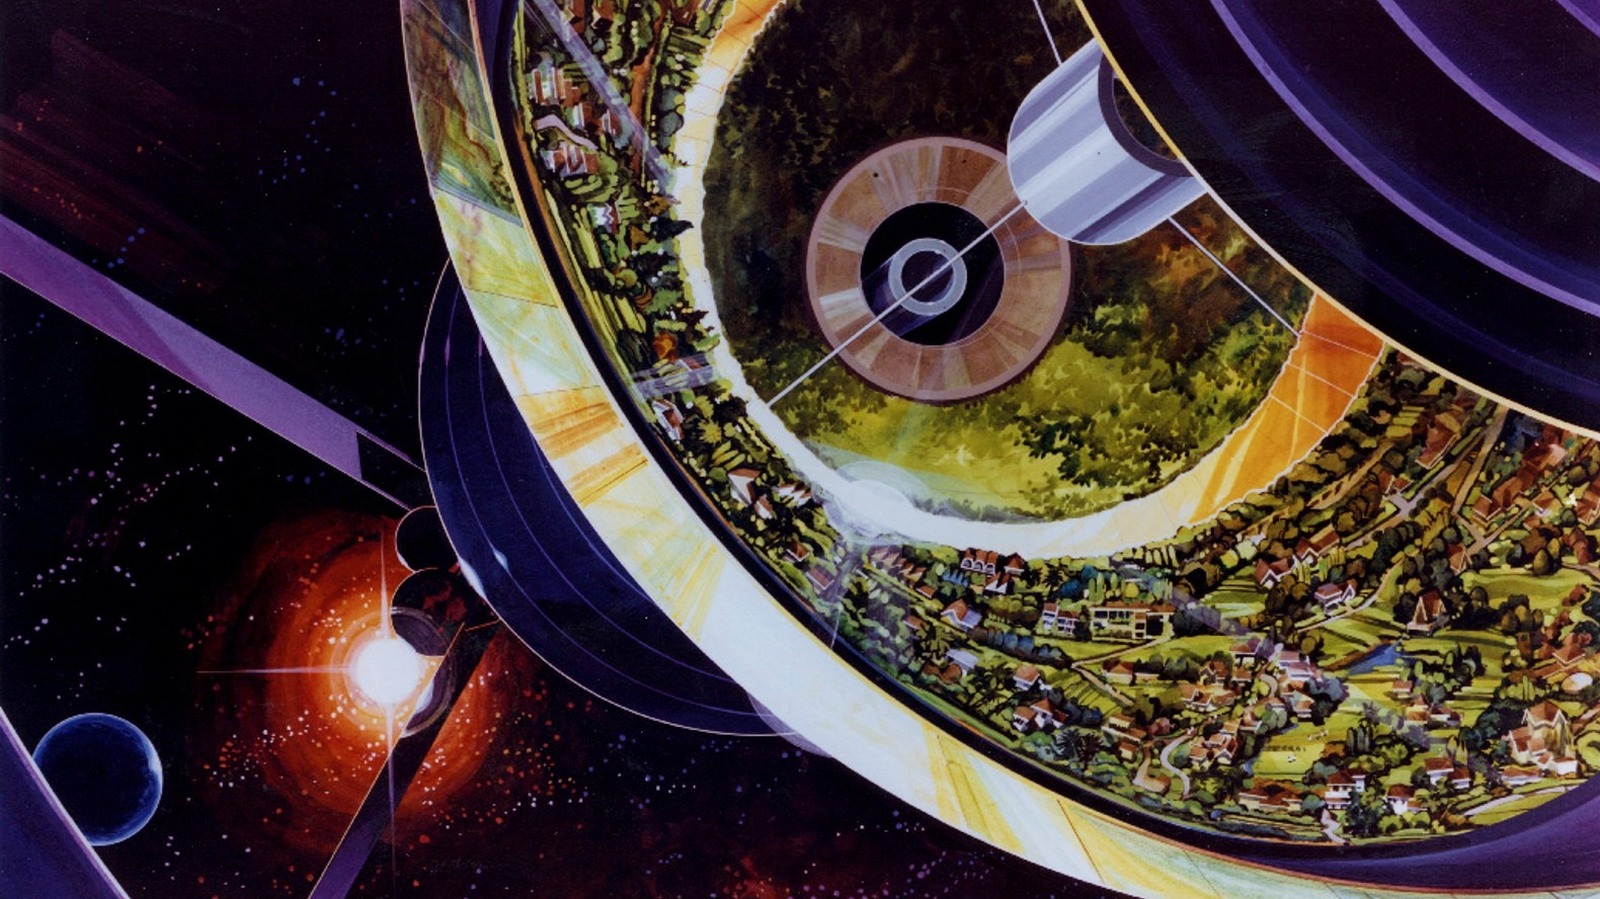 Here’s What NASA’s Vision For The Future Looked Like In 1975